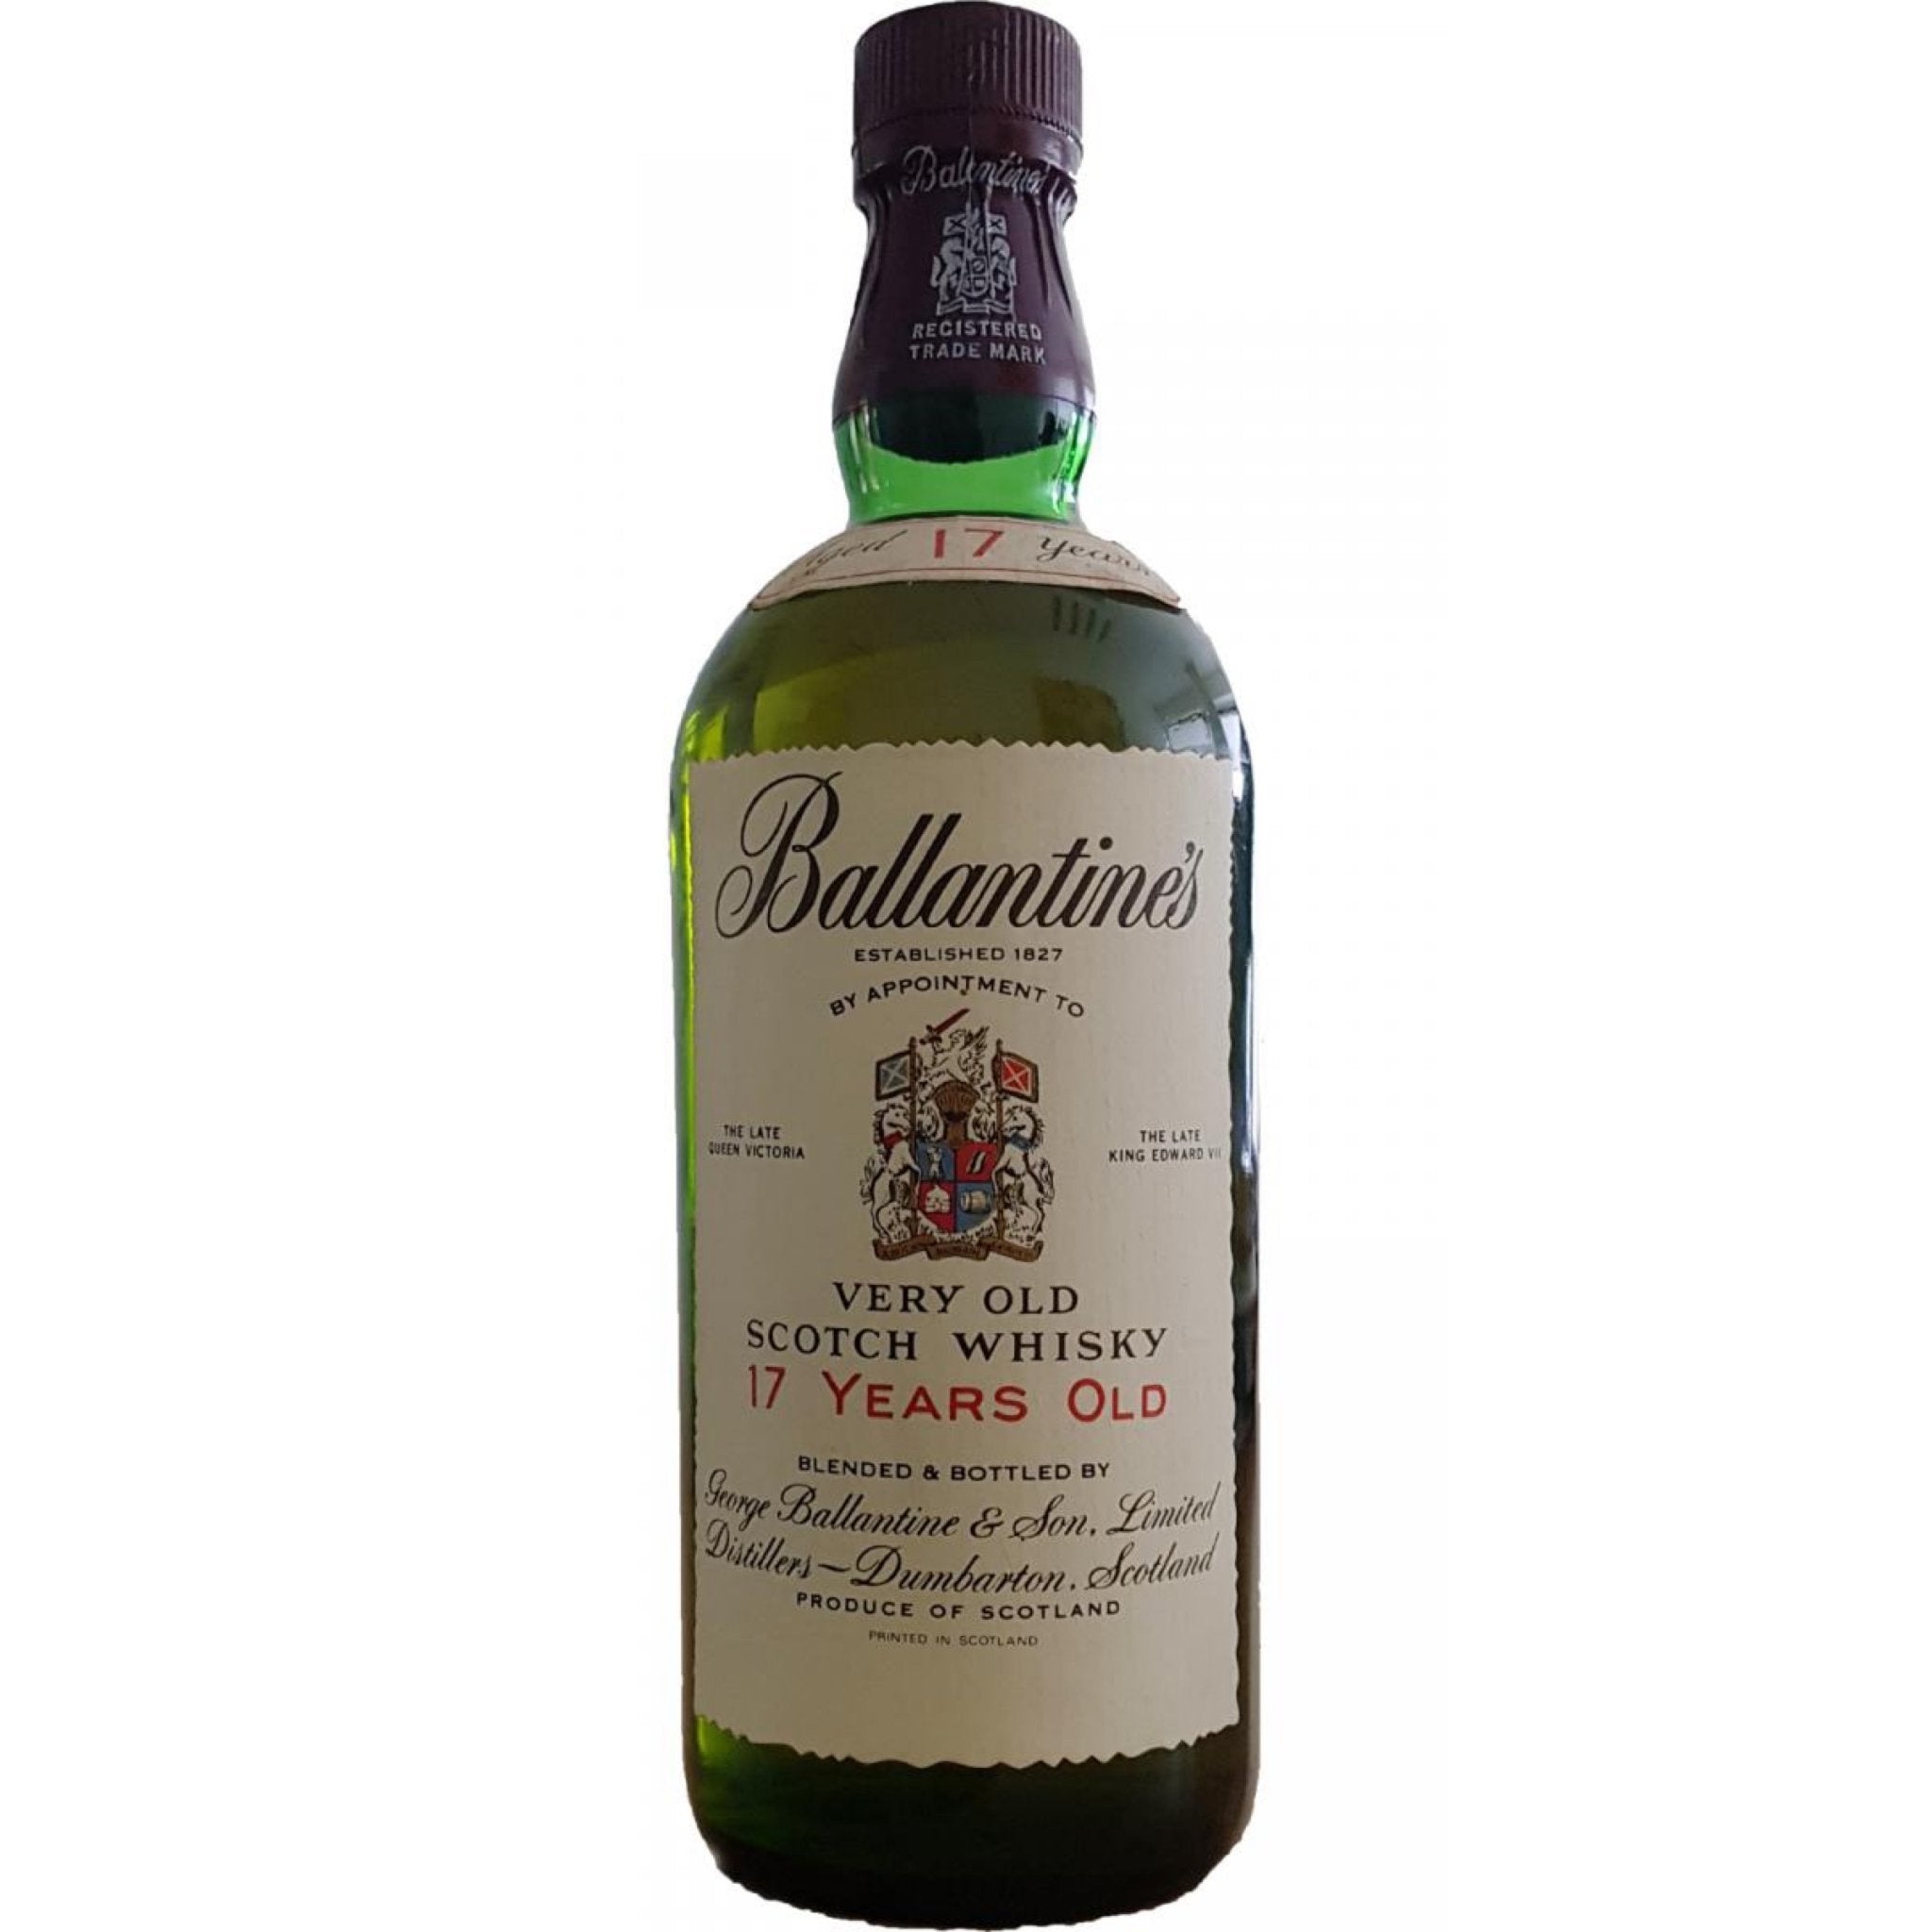 Ballantines Finest blended scotch whisky review 